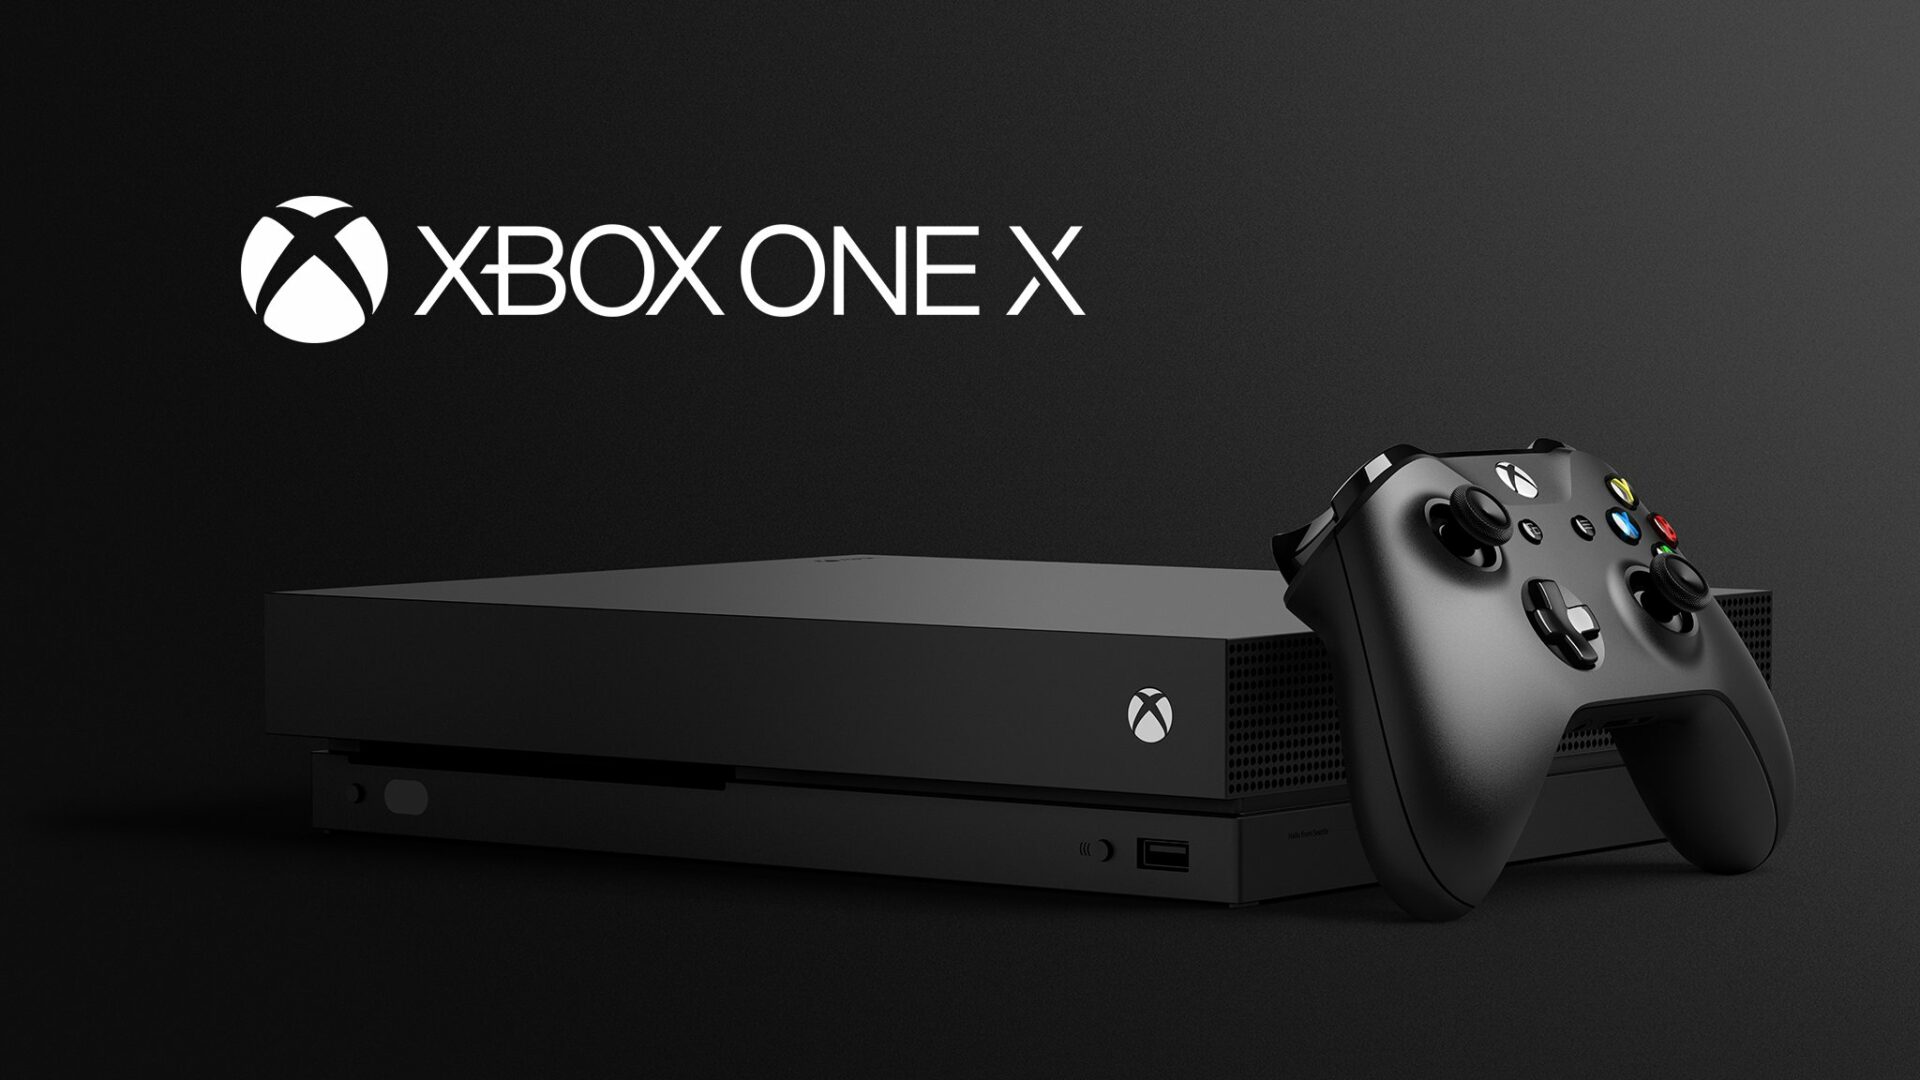 Xbox One X Release Date Look and Price Announced During E3 2017